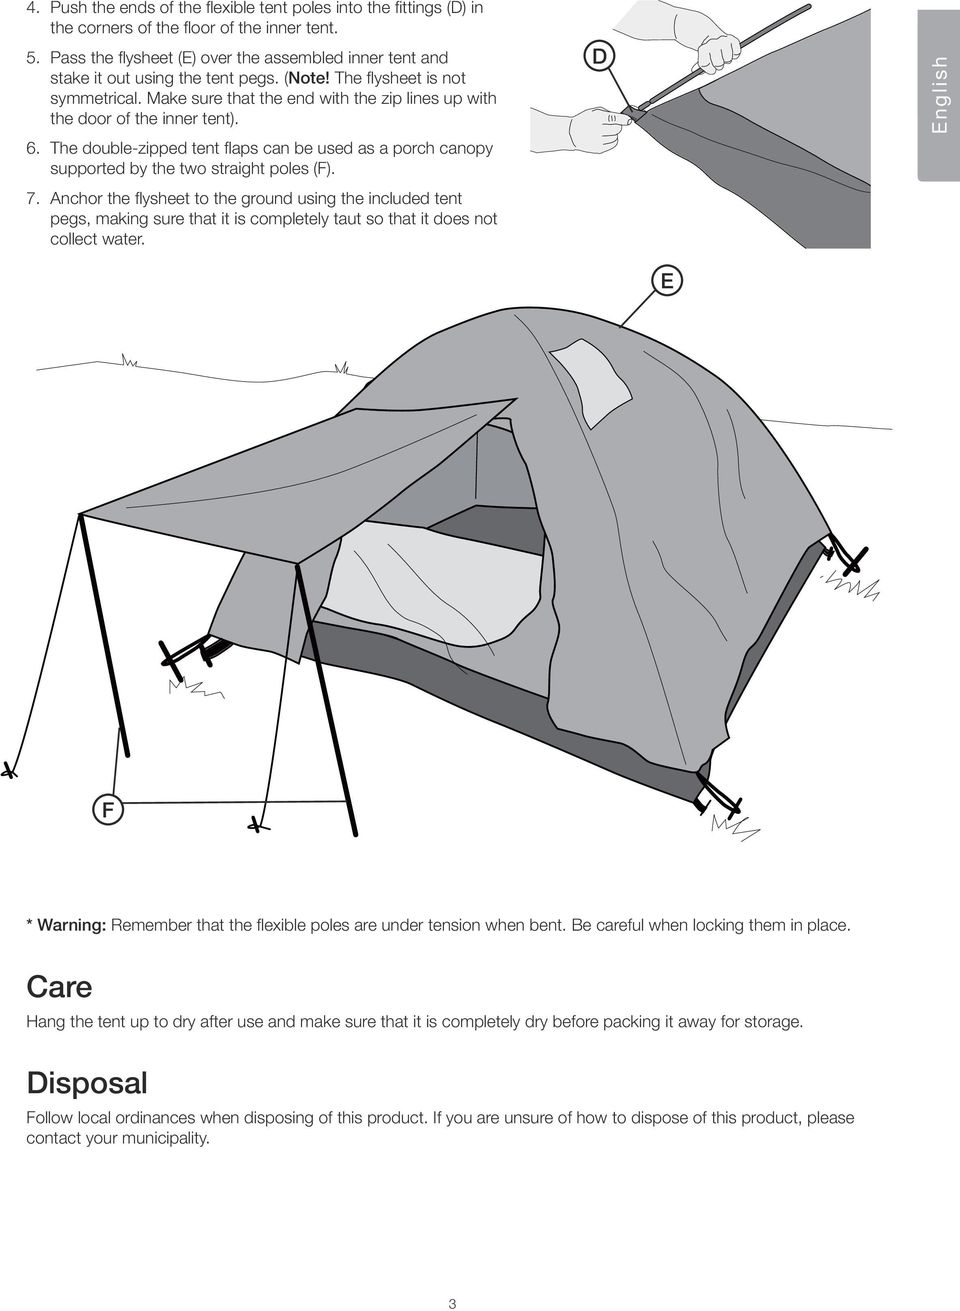 Make sure that the end with the zip lines up with the door of the inner tent). 6. The double-zipped tent flaps can be used as a porch canopy supported by the two straight poles (F). 7.